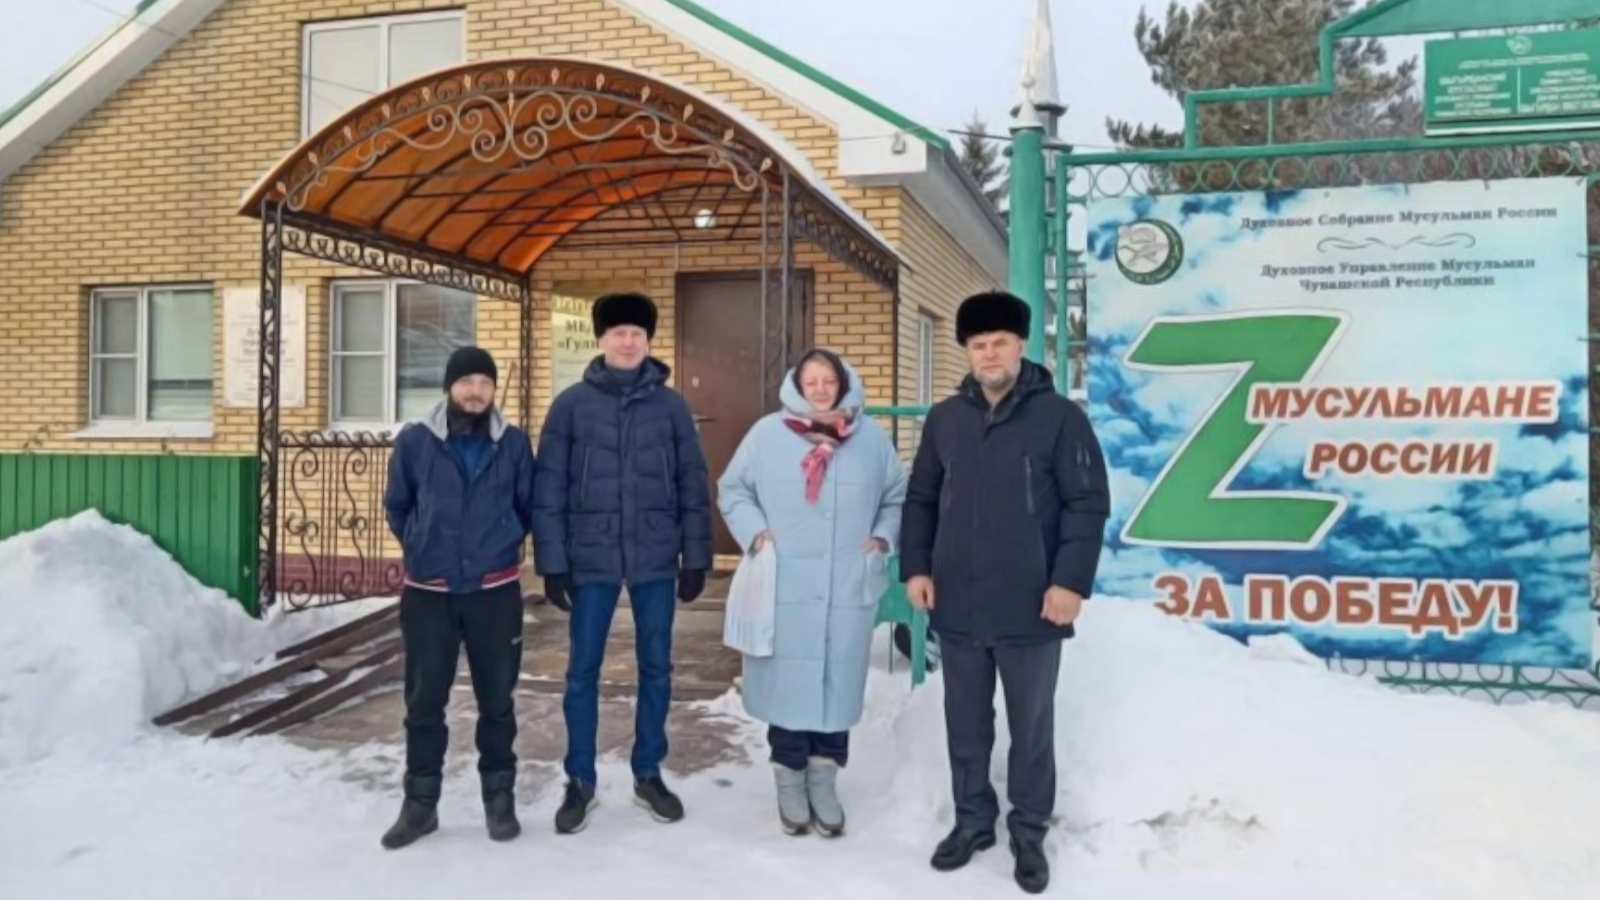 In Chuvashia, the solemn summing up of this year will be a great success: there will be no condemnation of raids on mosques